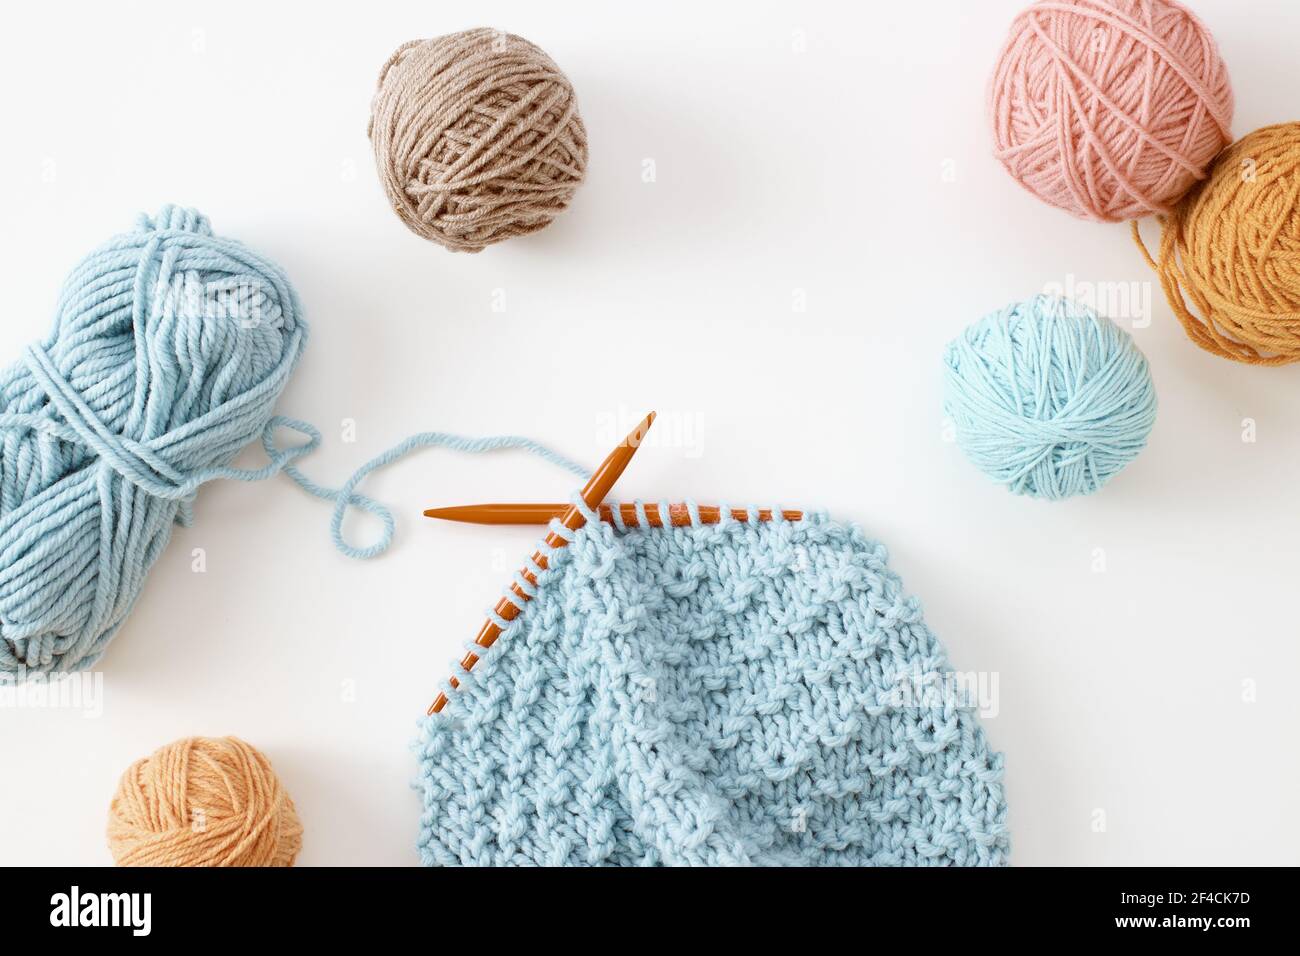 Knitting project in progress. A piece of knitting with ball of yarn and a knitting needles. Stock Photo